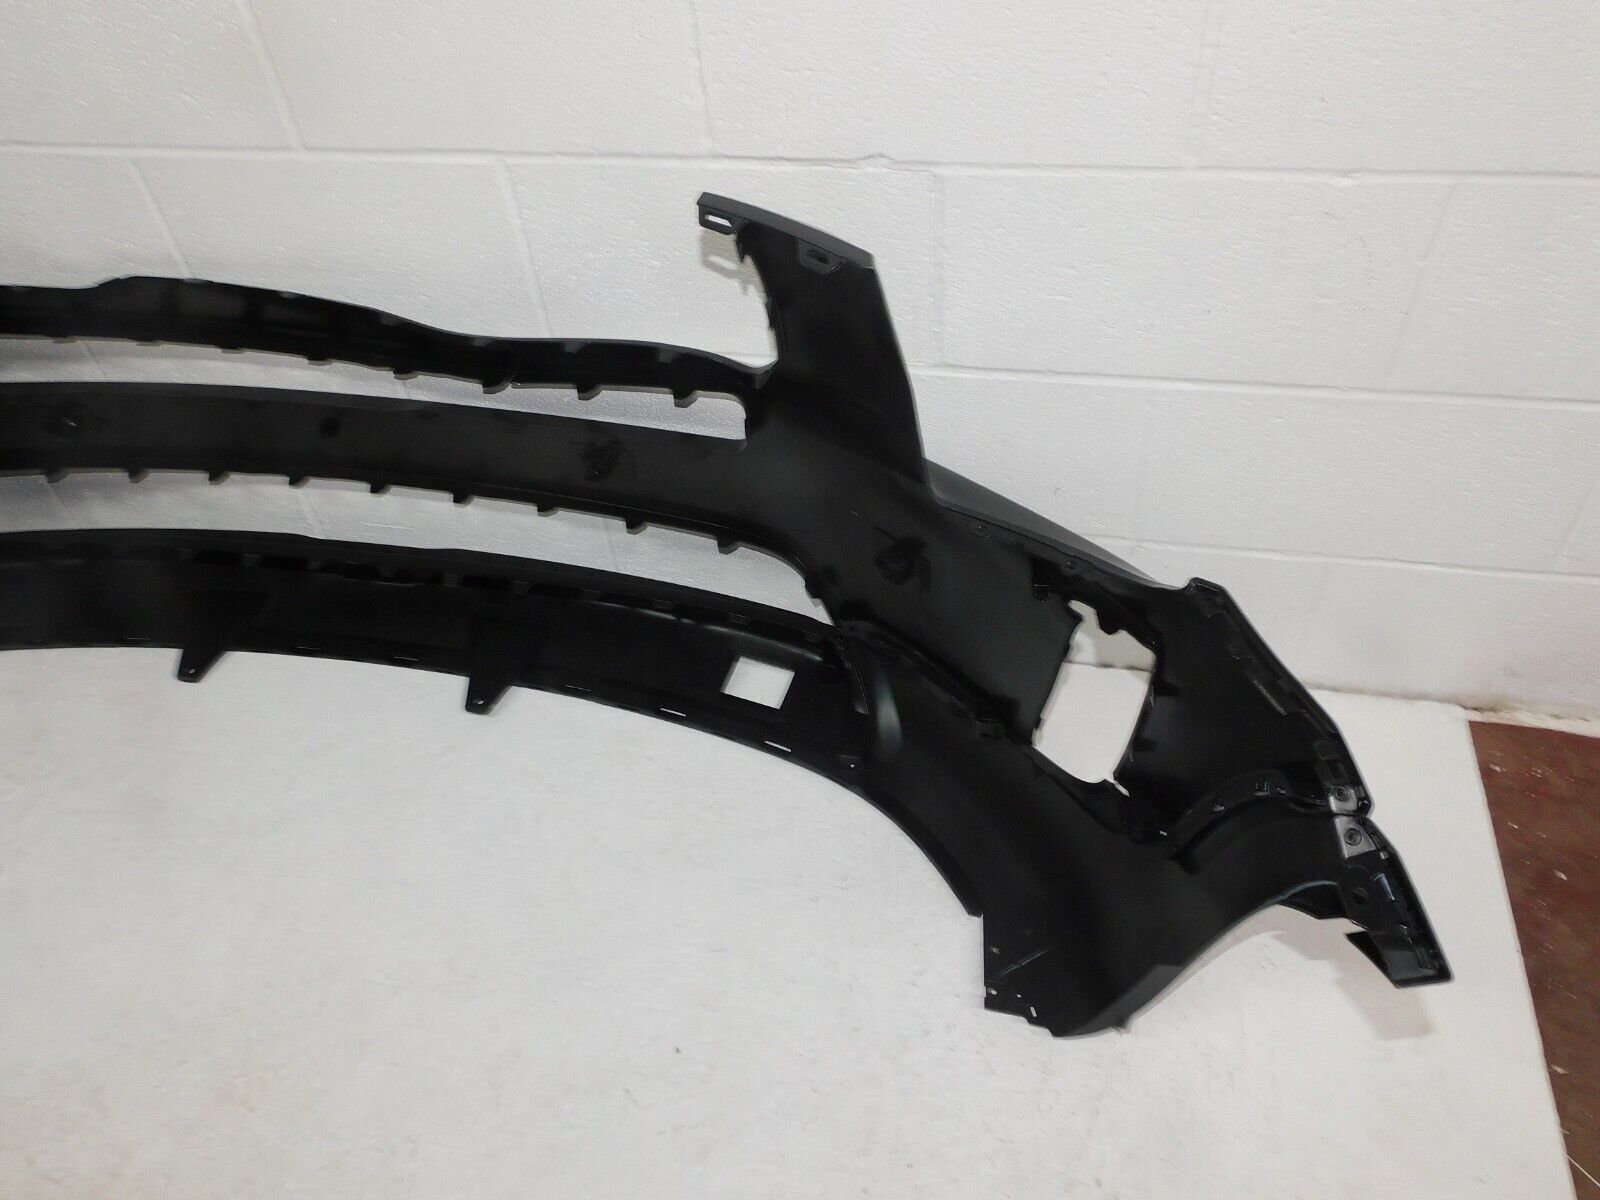 Used 2020 2022 Kia Telluride Front Bumper Cover Oem With Sensor Holes For Sale 86511 S9000 2503